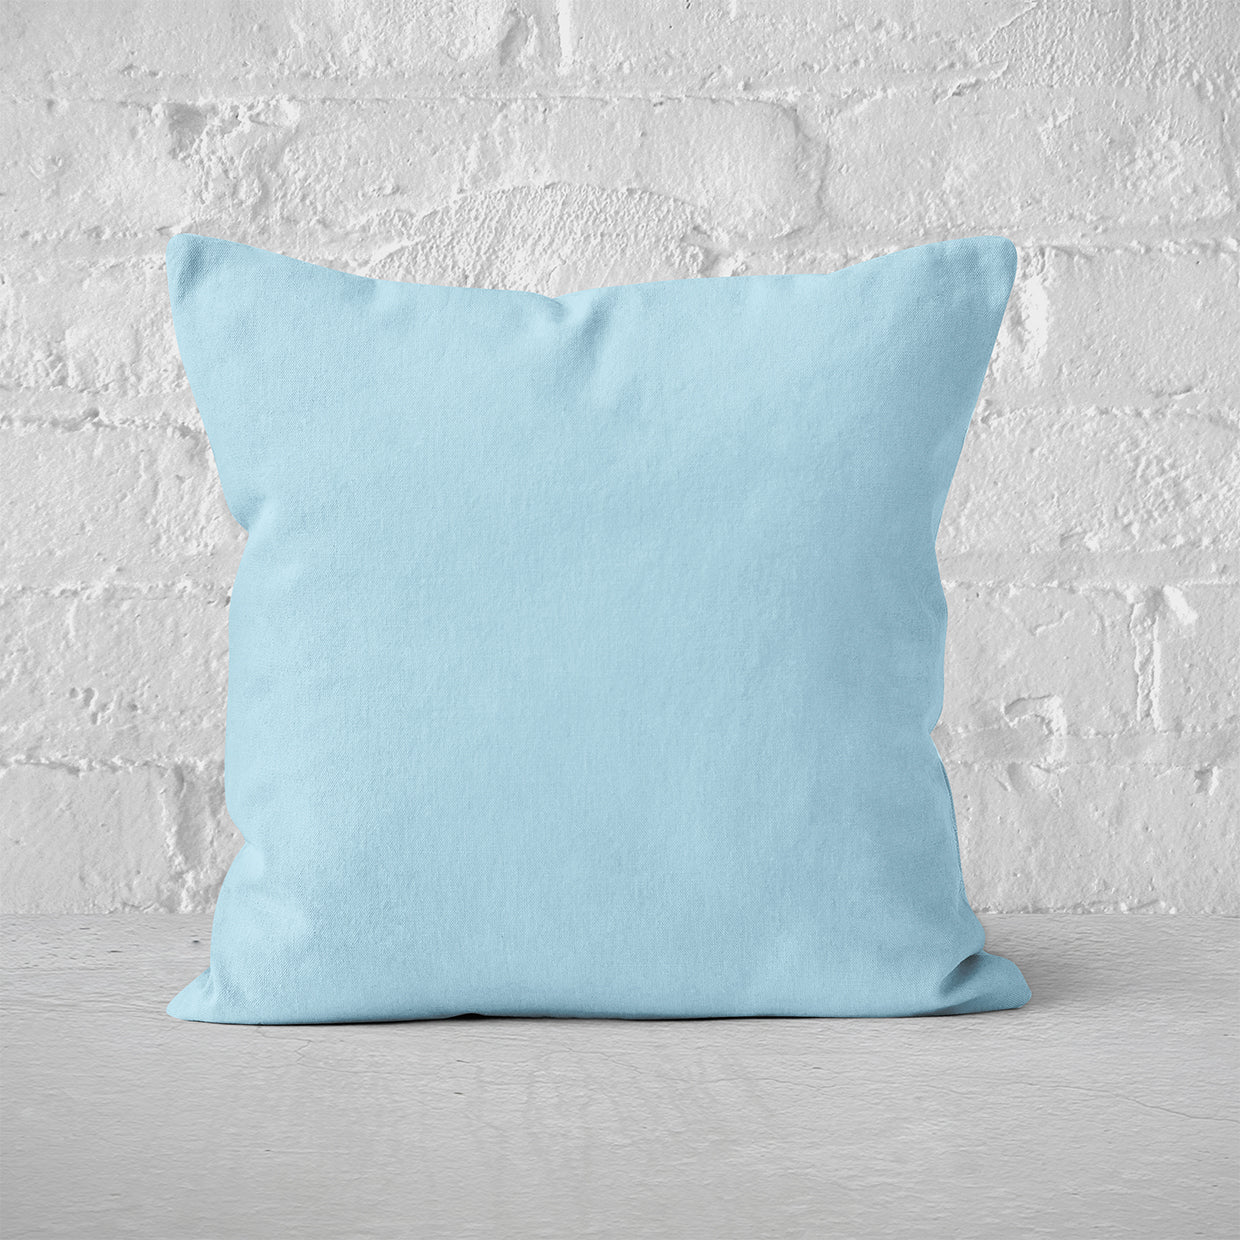 Pillow Cover Art Feature 'Solid' - Sky Blue - Cotton Twill